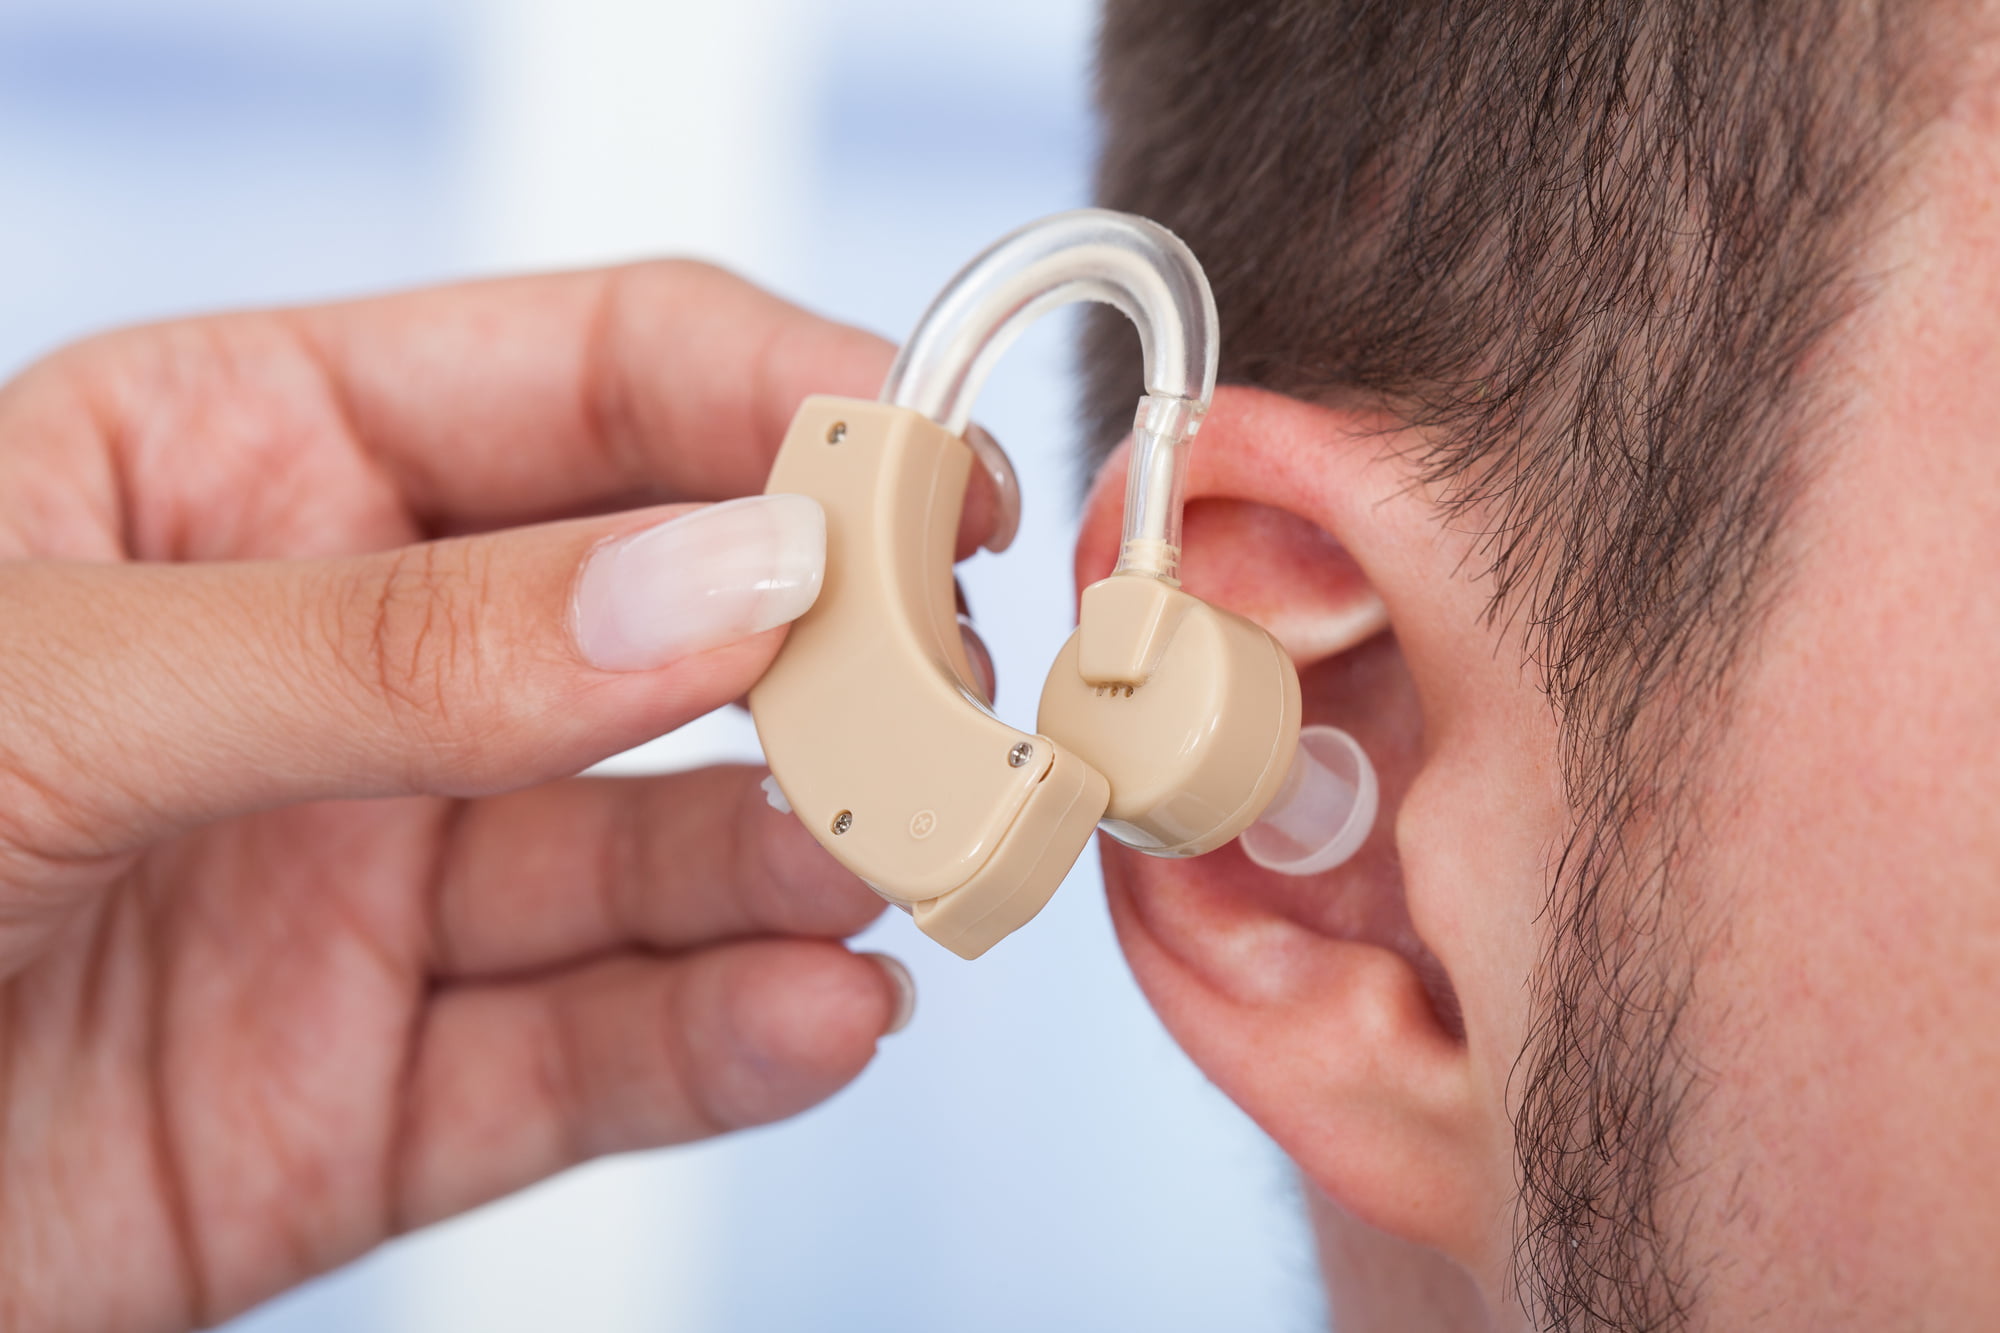 Are you wondering what type of hearing aids are right for you? Click here for the ultimate guide to the different types of hearing aids to help you decide.